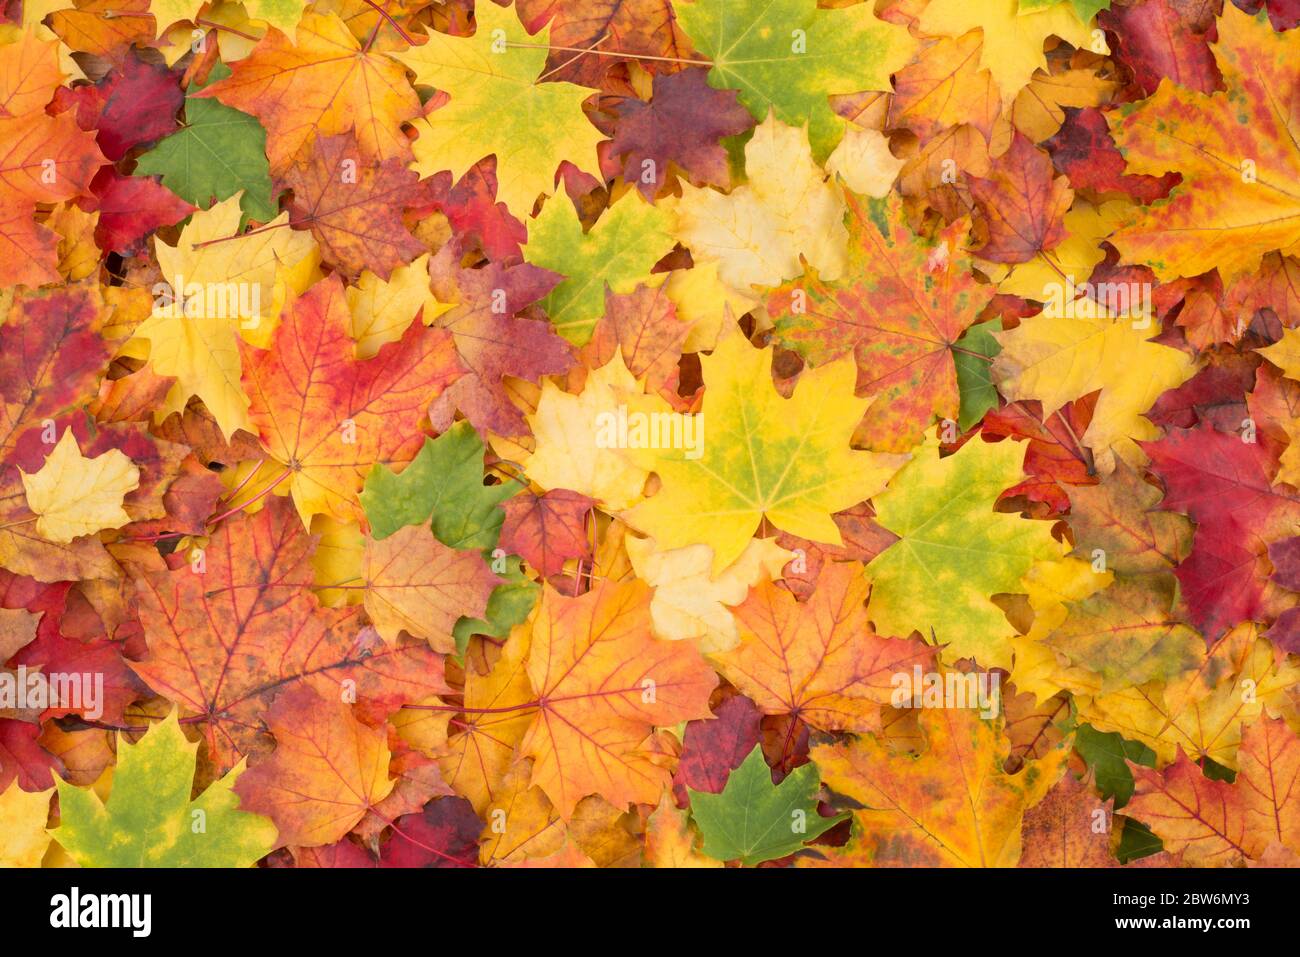 Colorful fall leaves background Stock Photo